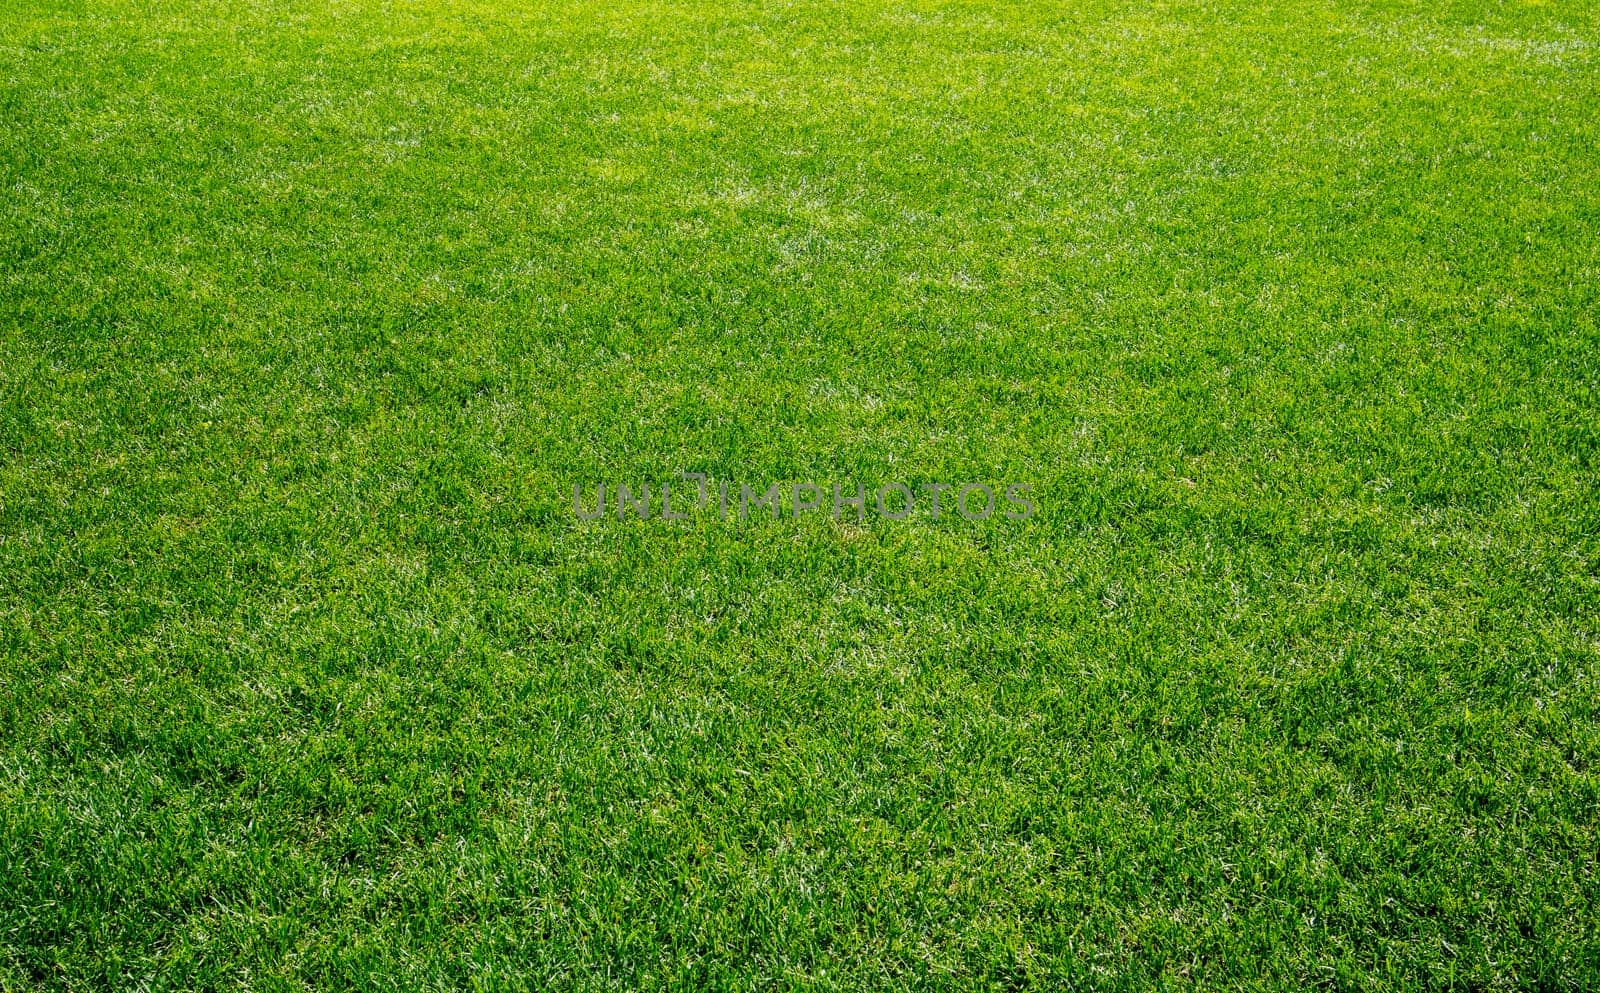 Smooth green grass, well-groomed lawn on a sunny day. Natural background of yellow-green grass in the sun. Stadium grass. Top view of garden background, bright grass concept, lawn for sports field. by Roshchyn